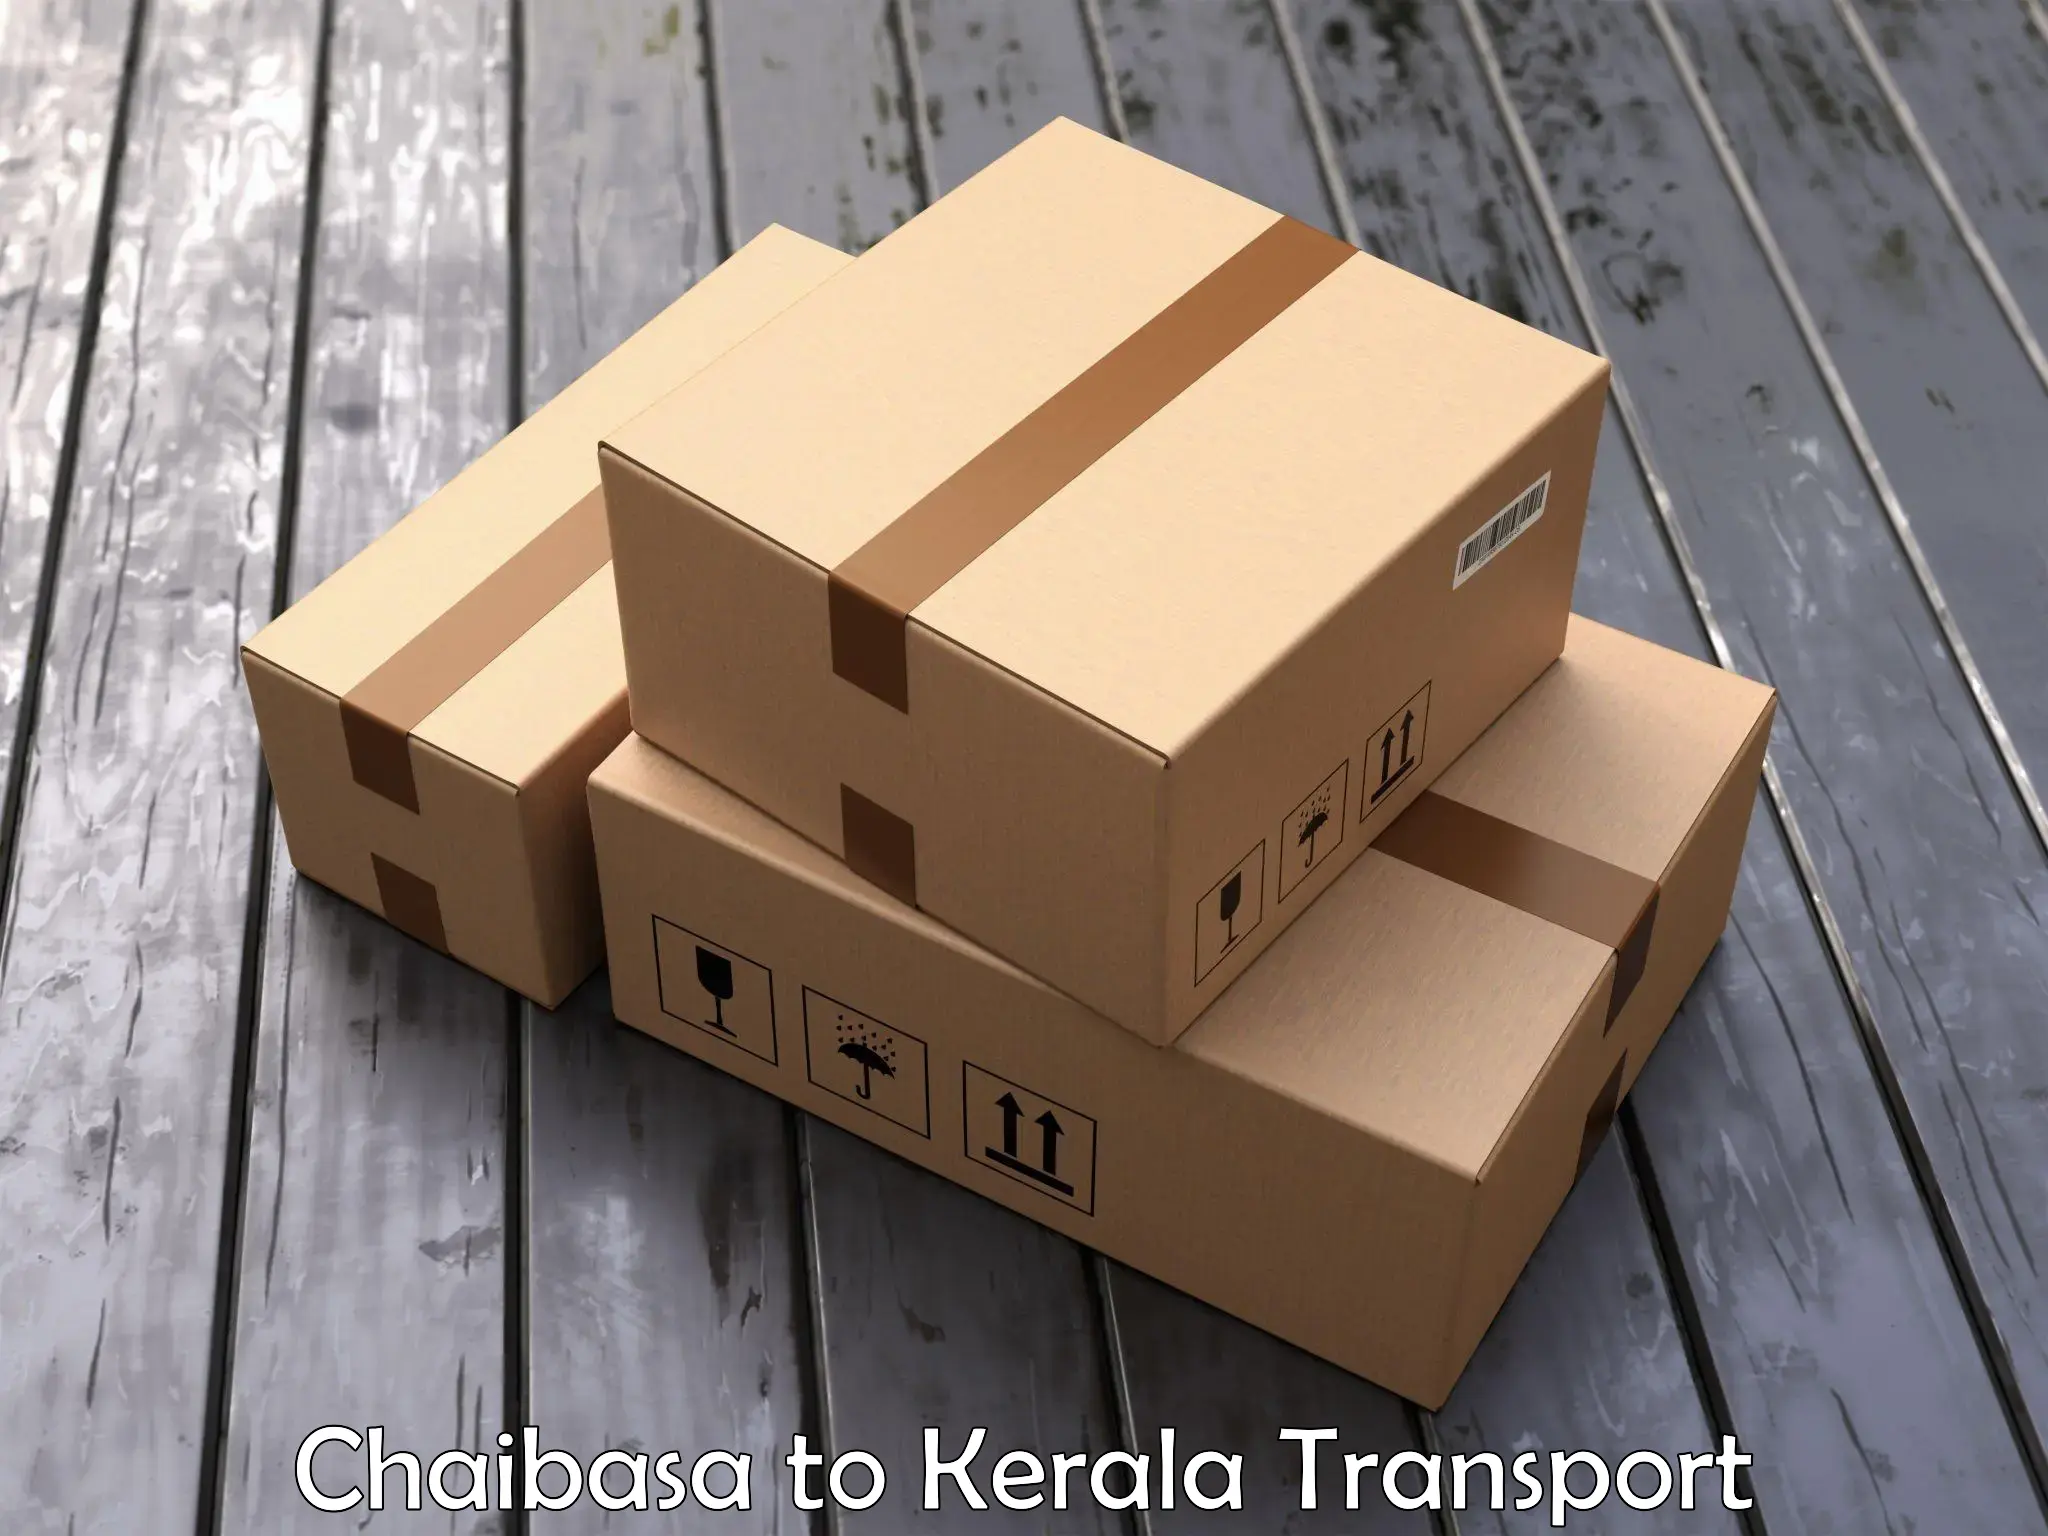 Two wheeler parcel service Chaibasa to Calicut